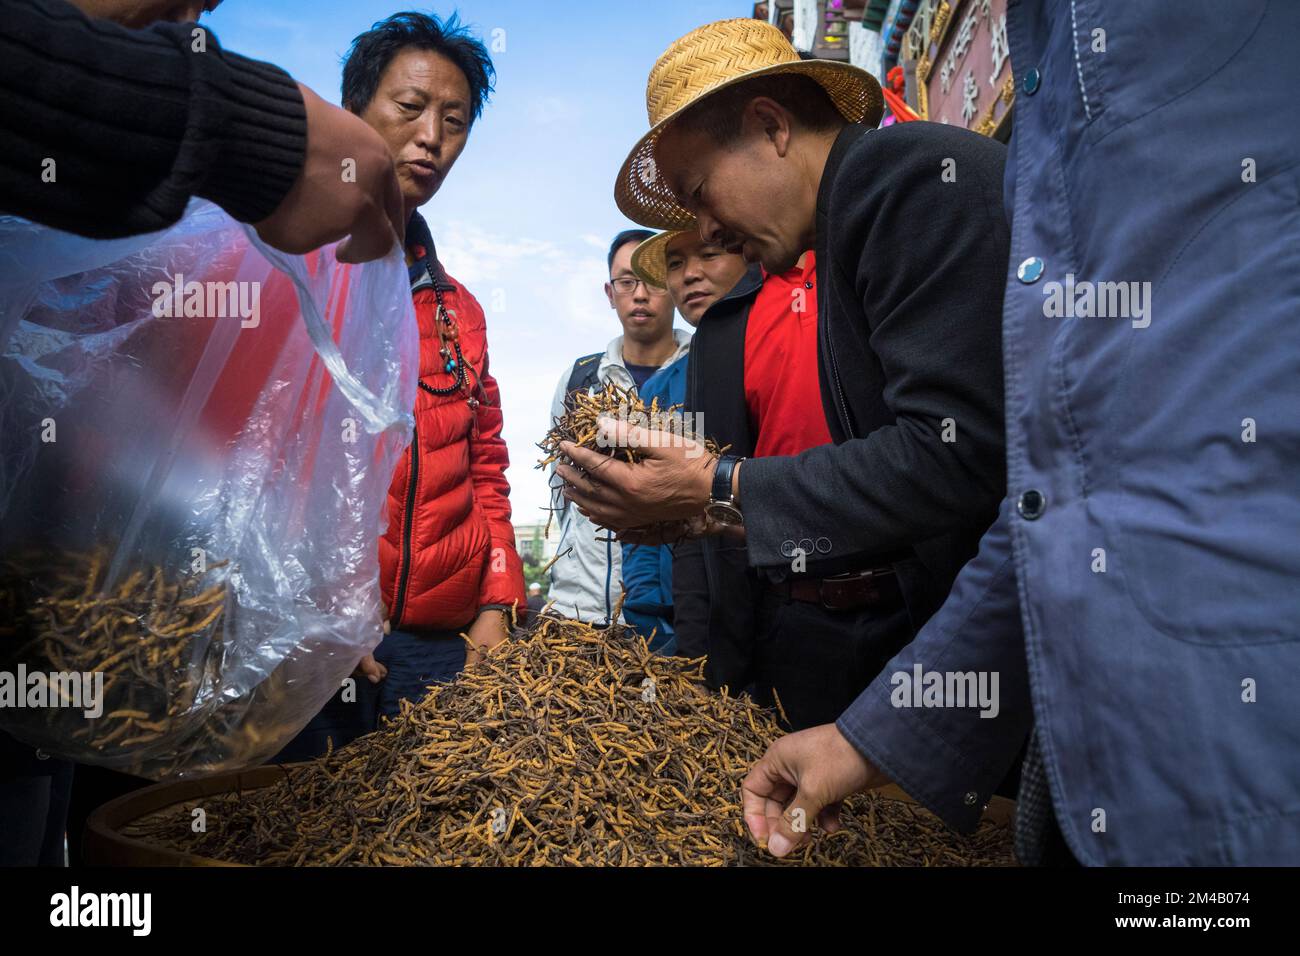 Sale of Yartsa Gunbu (Ophiocordyceps sinensis), the caterpillar fungus considered an aphrodisiac and a cure-all for any ailment in both traditional Ch Stock Photo